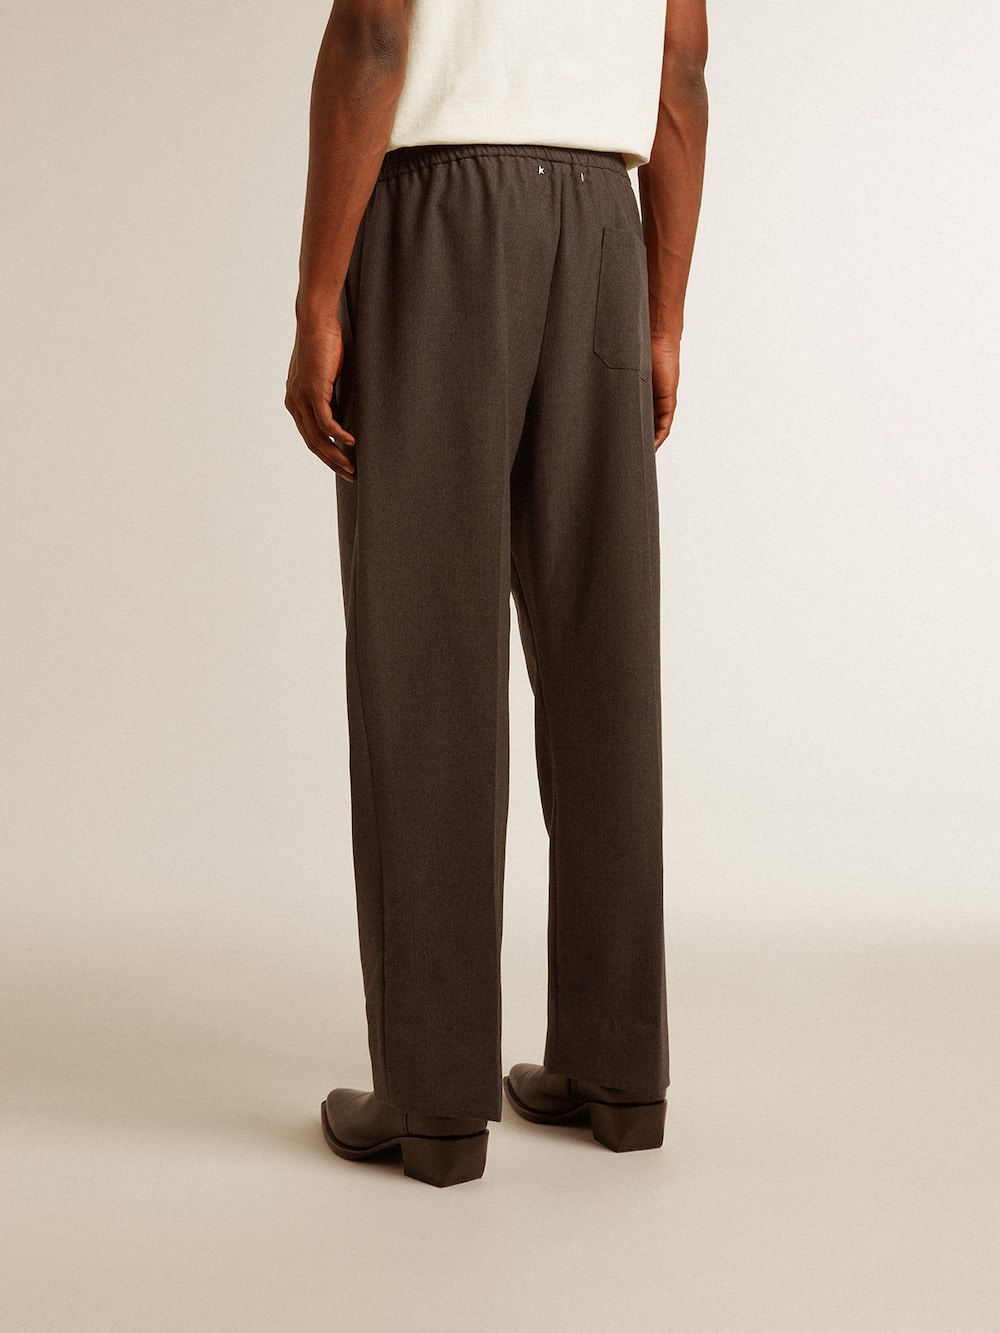 Golden Goose - Men's soft pants in anthracite gray wool in 